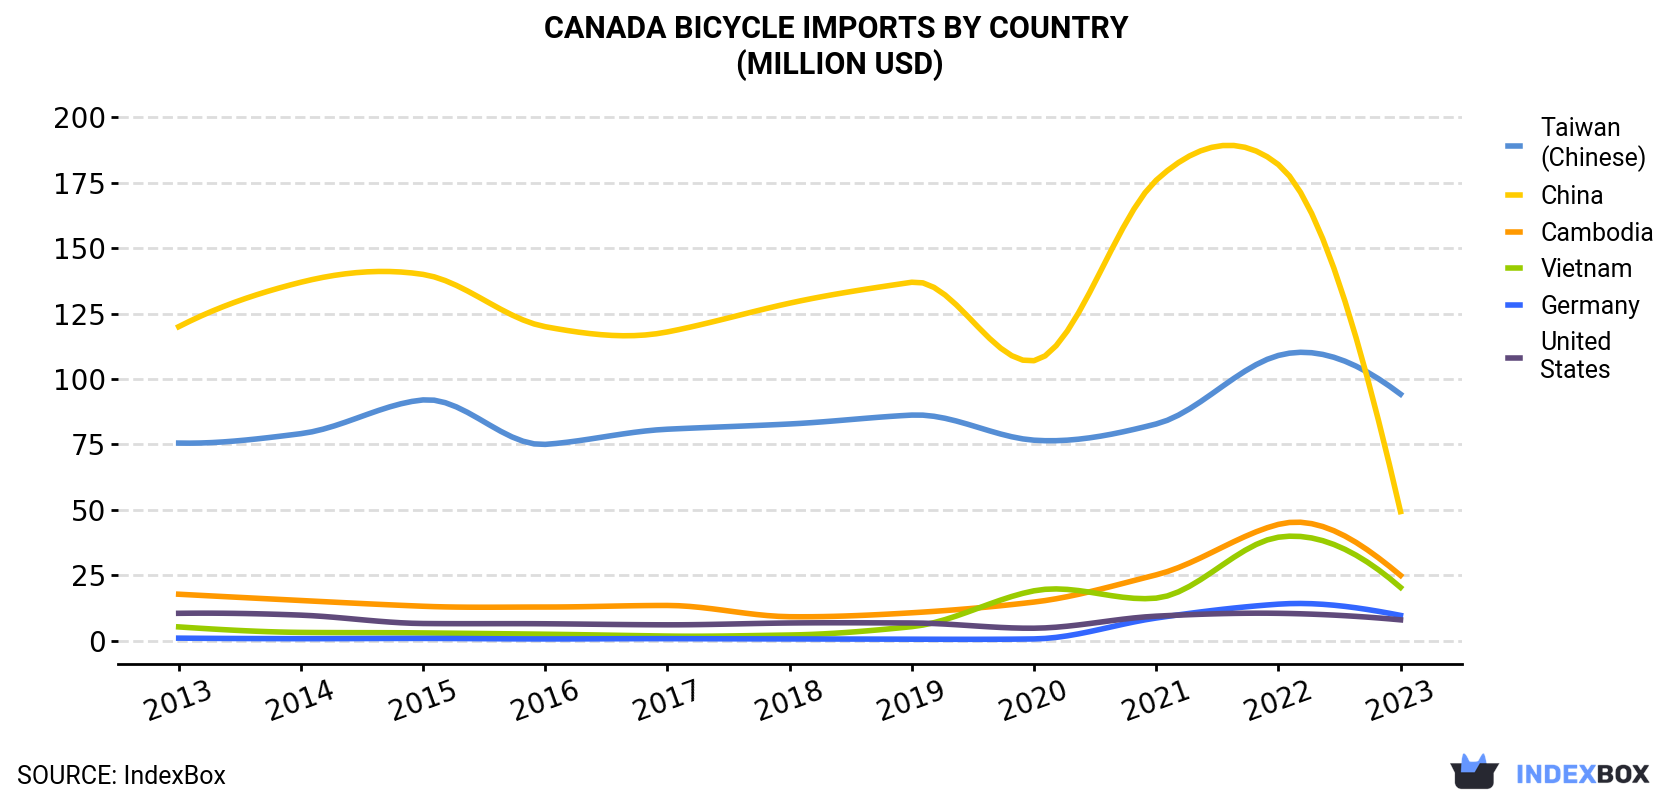 Canada Bicycle Imports By Country (Million USD)